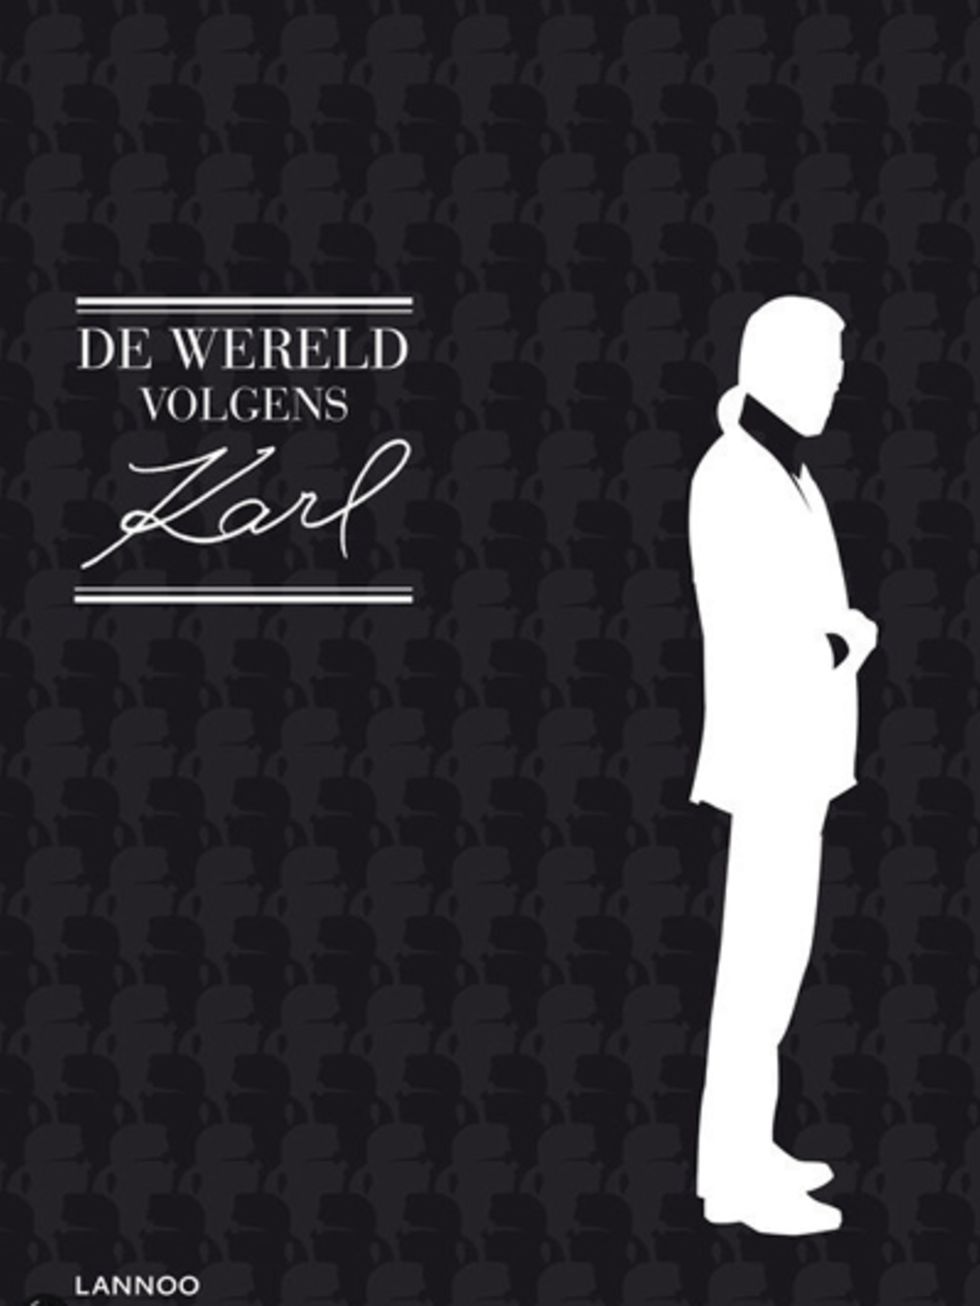 Sleeve, Standing, Formal wear, Font, Black, Animation, Graphics, Graphic design, 